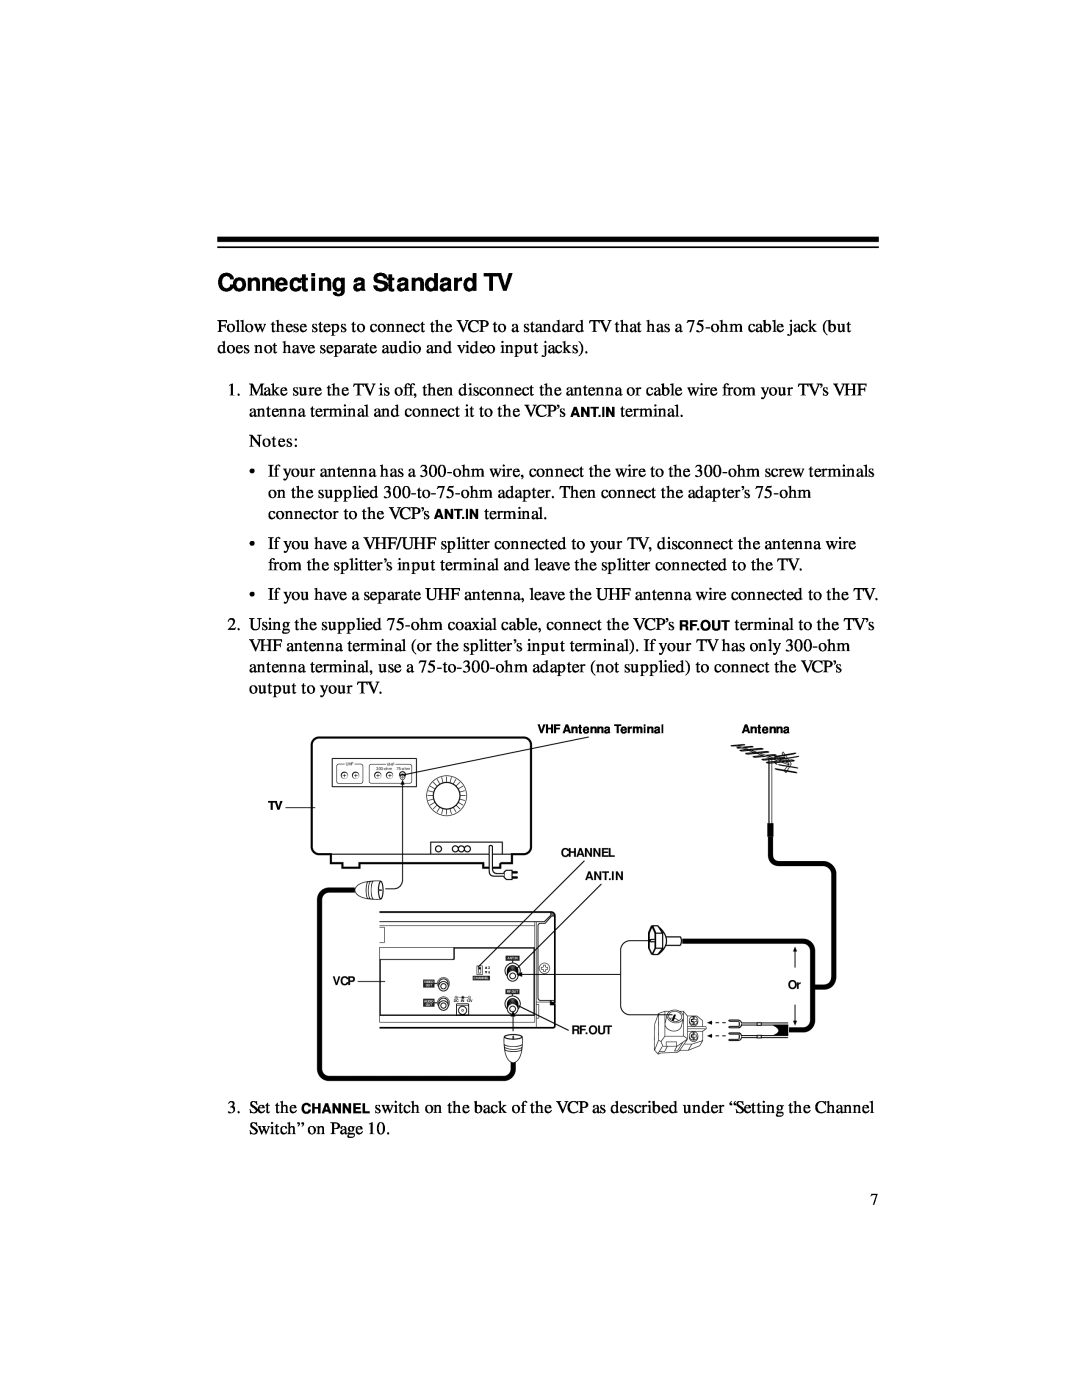 RCA 40, 50 owner manual Connecting a Standard TV 